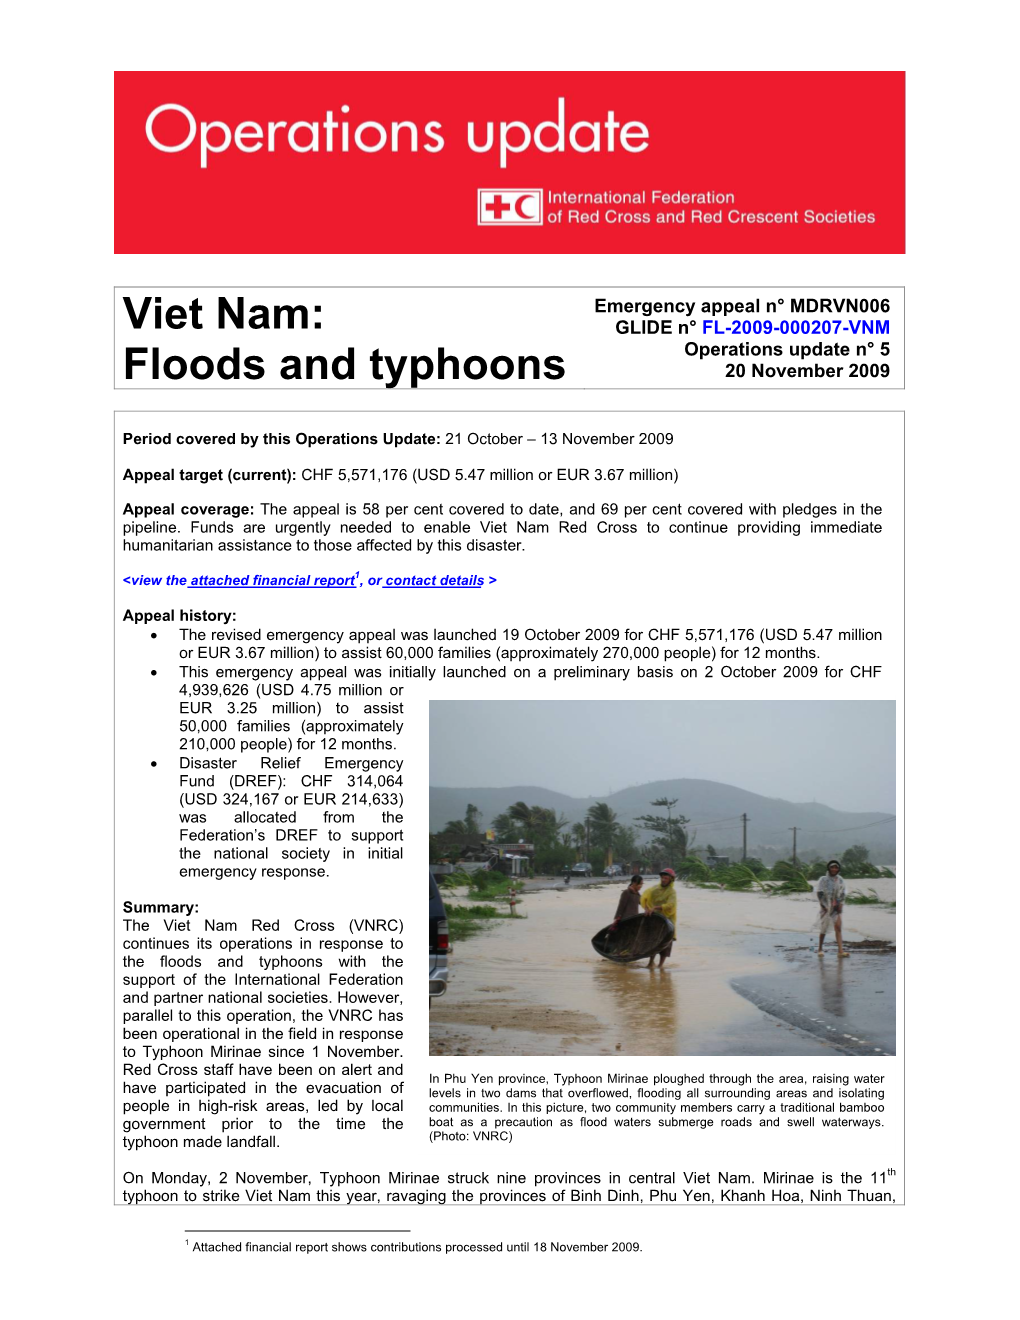 Floods and Typhoons 20 November 2009